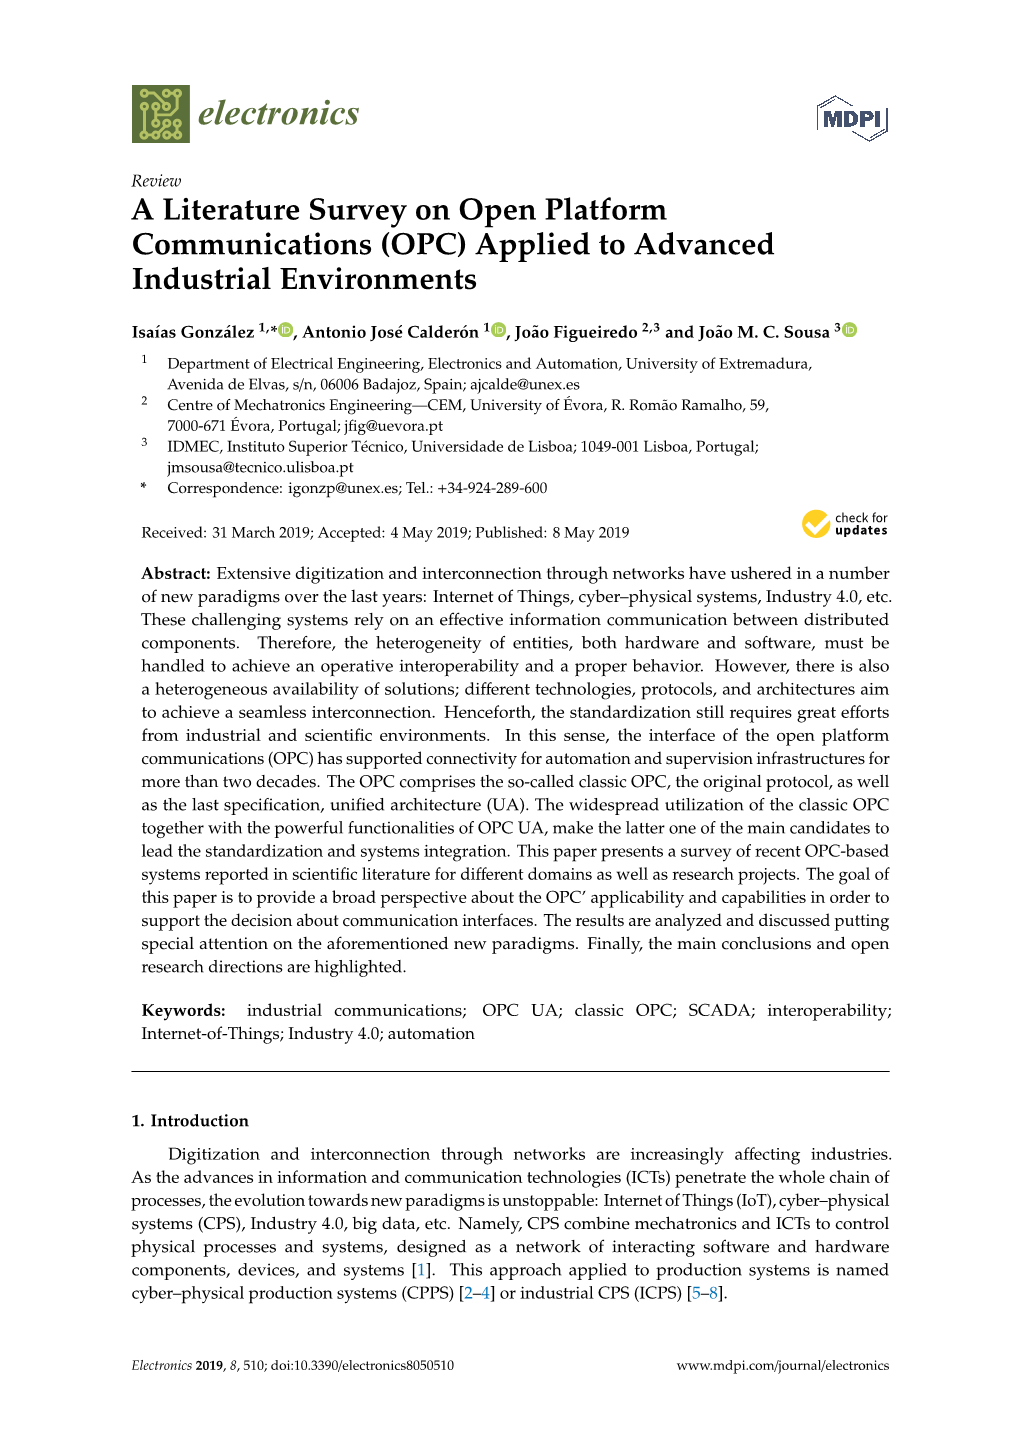 A Literature Survey on Open Platform Communications (OPC) Applied to Advanced Industrial Environments